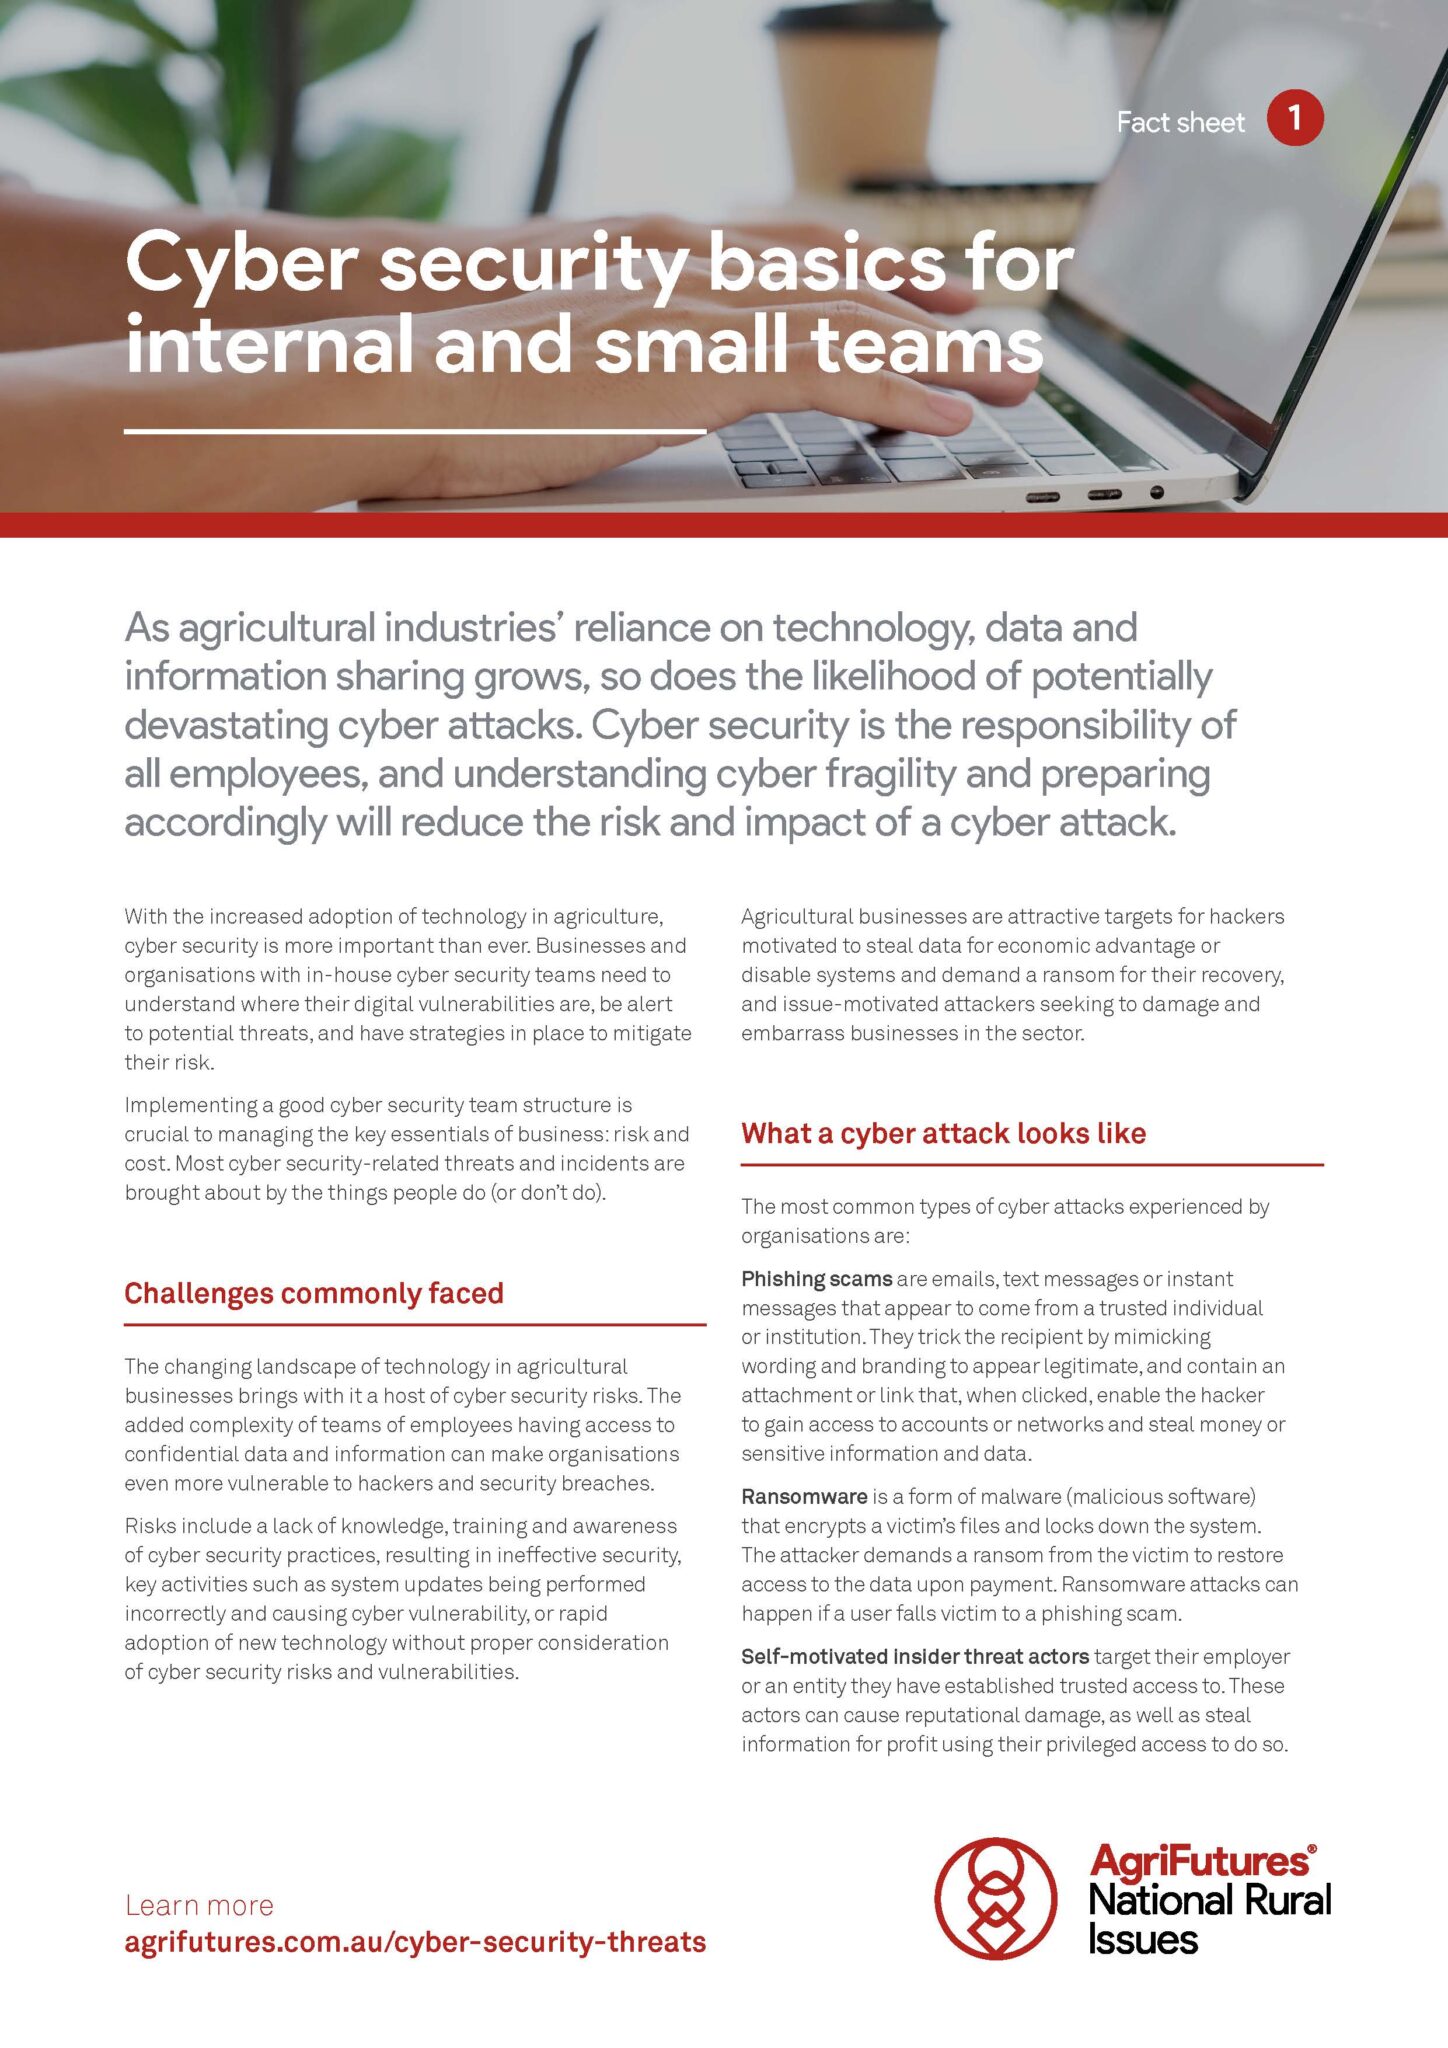 Fact sheet: Cyber security basics for internal and small teams - image